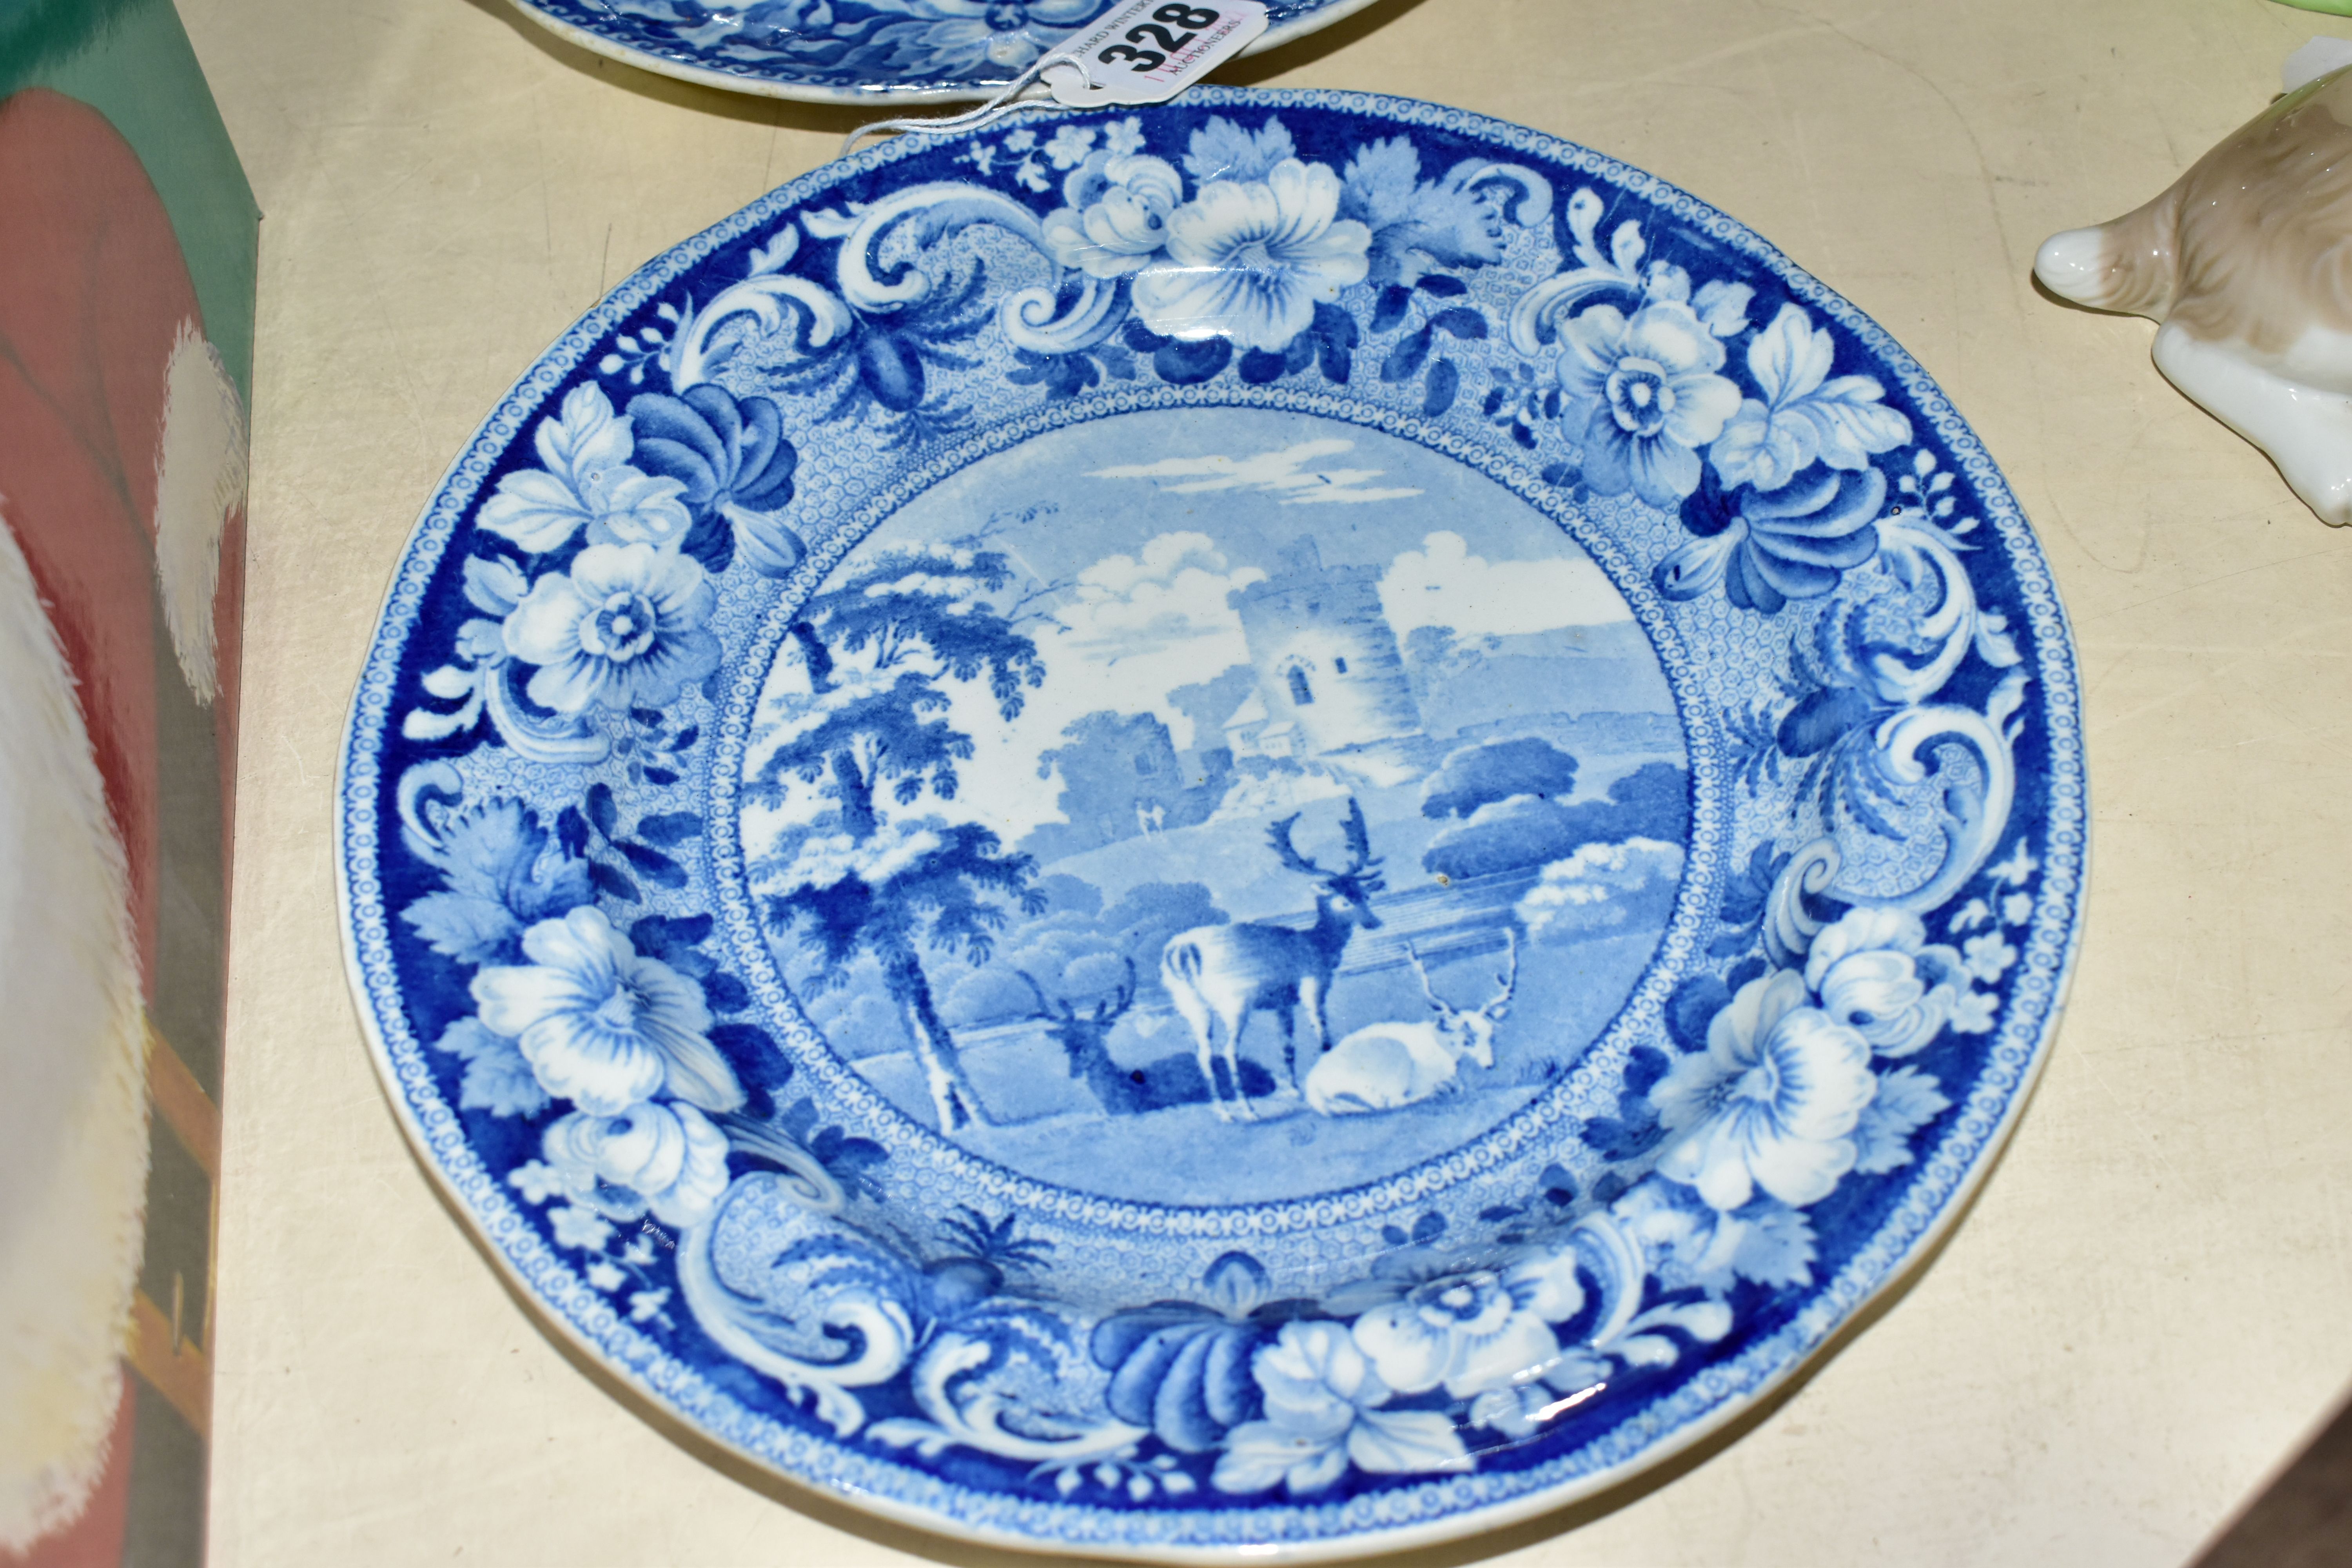 THREE SMALL NINETEENTH CENTURY BLUE AND WHITE PLATES, transfer printed with deer in the landscape, - Image 2 of 5